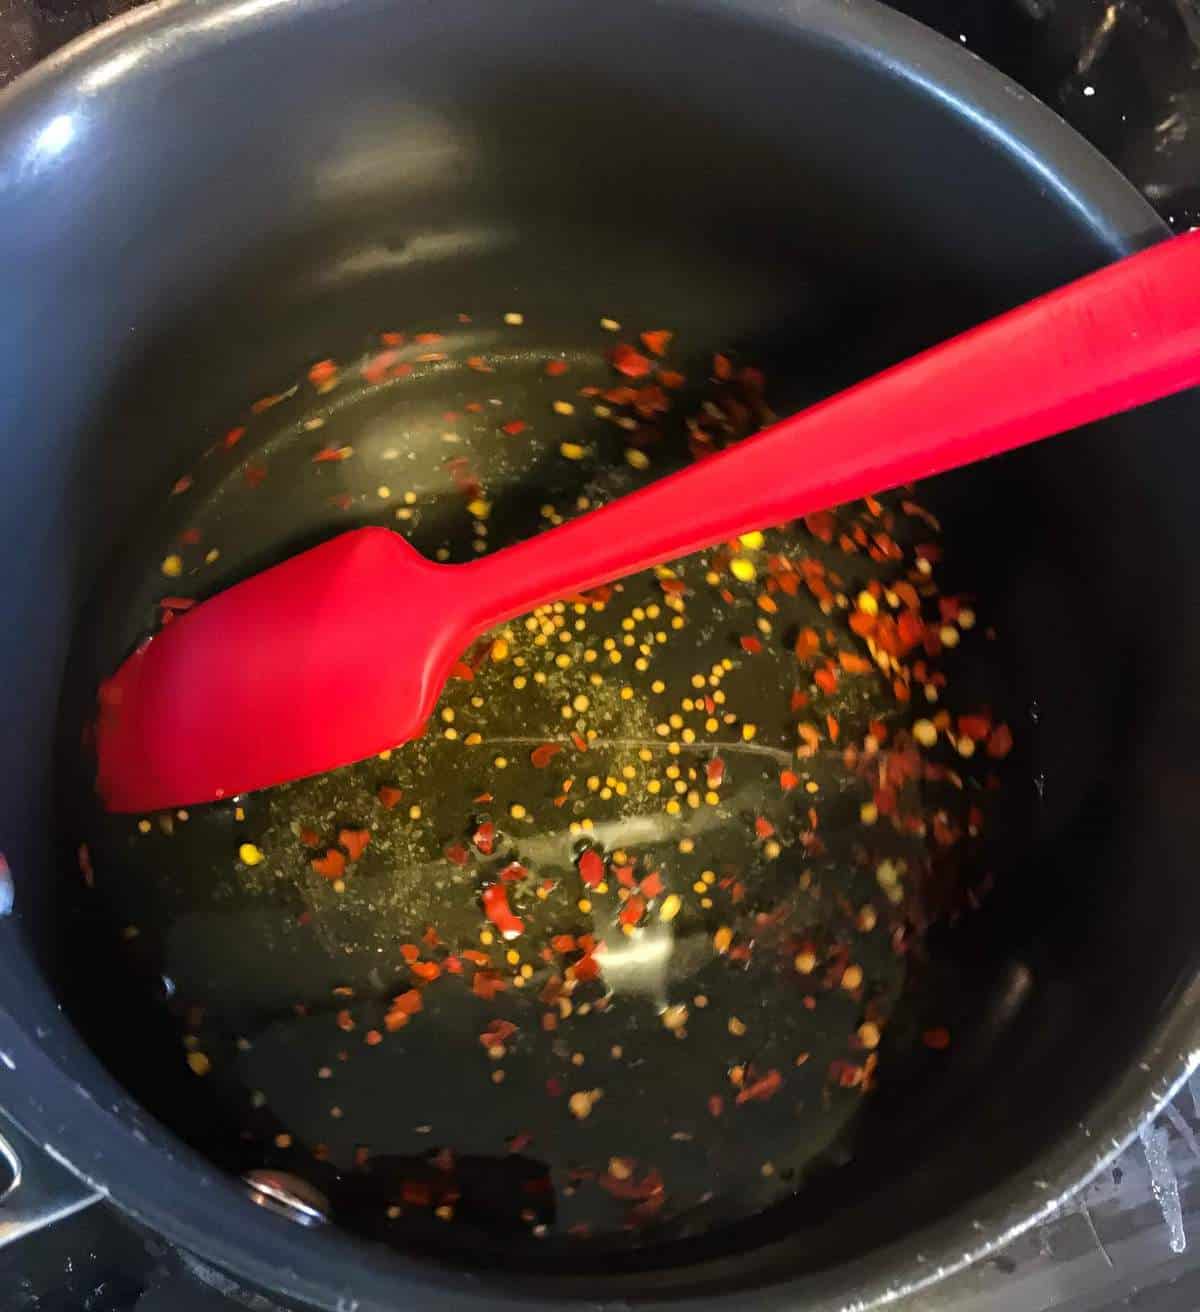 pickling brine cooking in a black pot with a red spatula